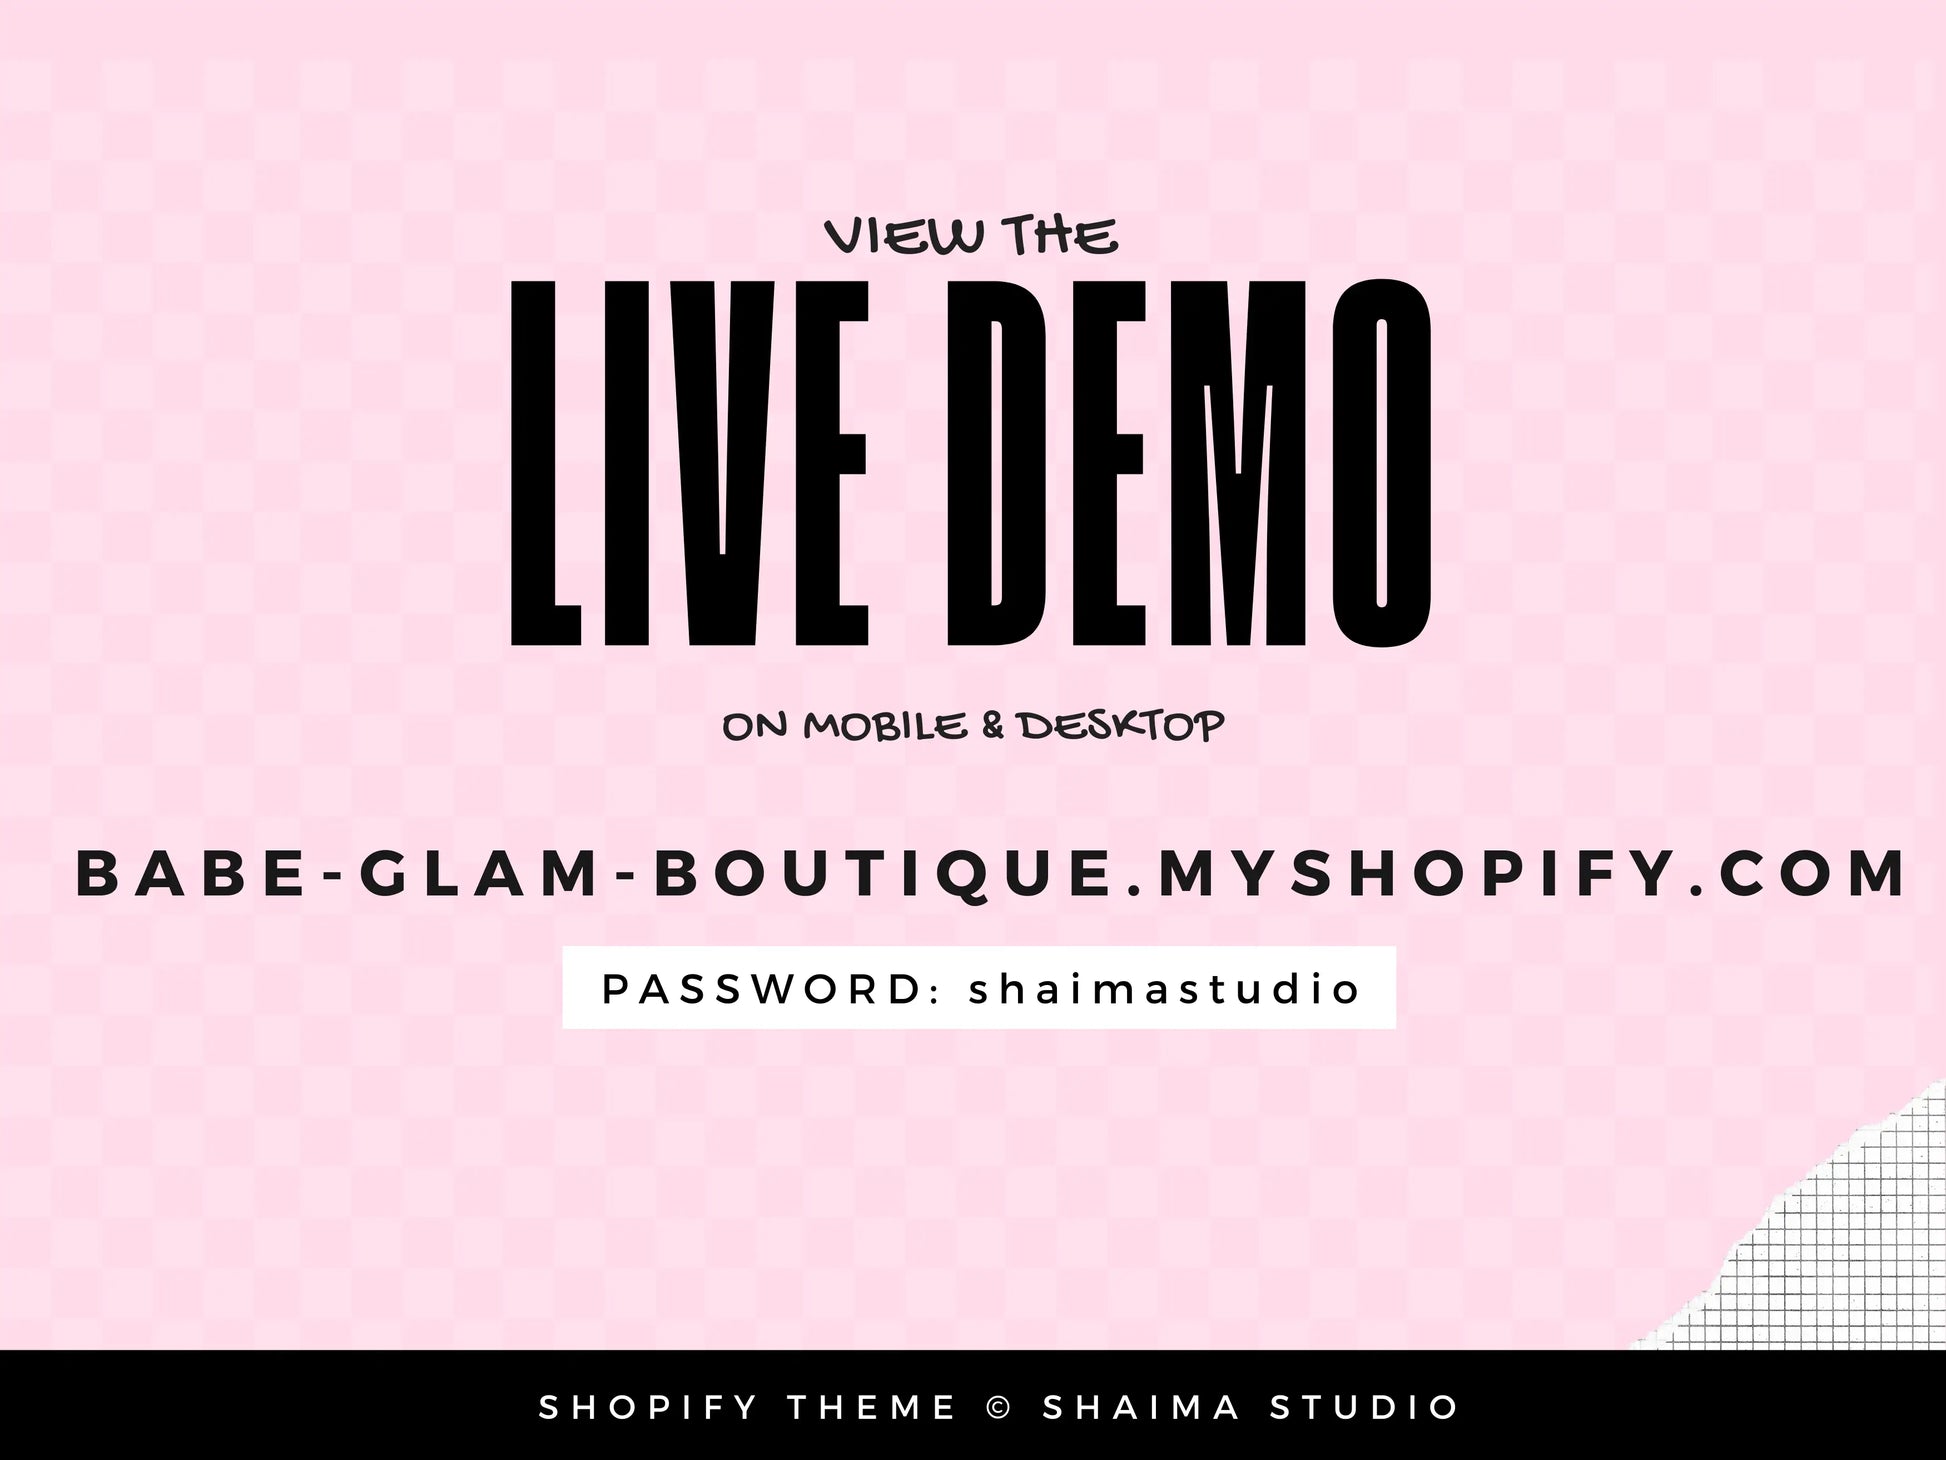 View the live demo